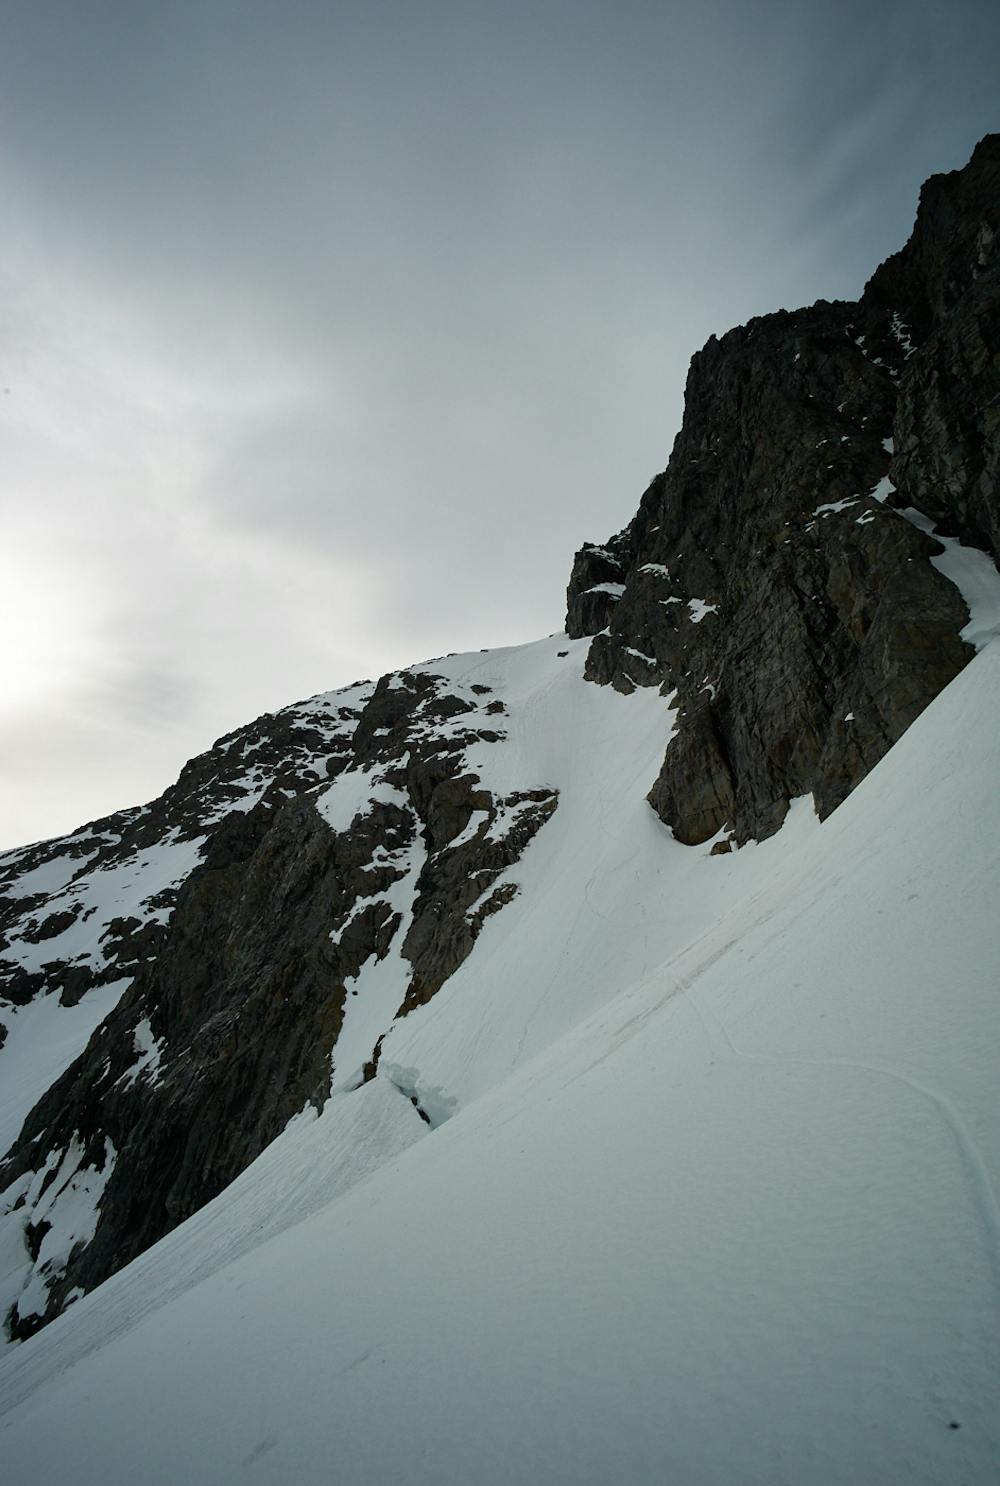 The north couloir, seen from the bottom at around 800 m